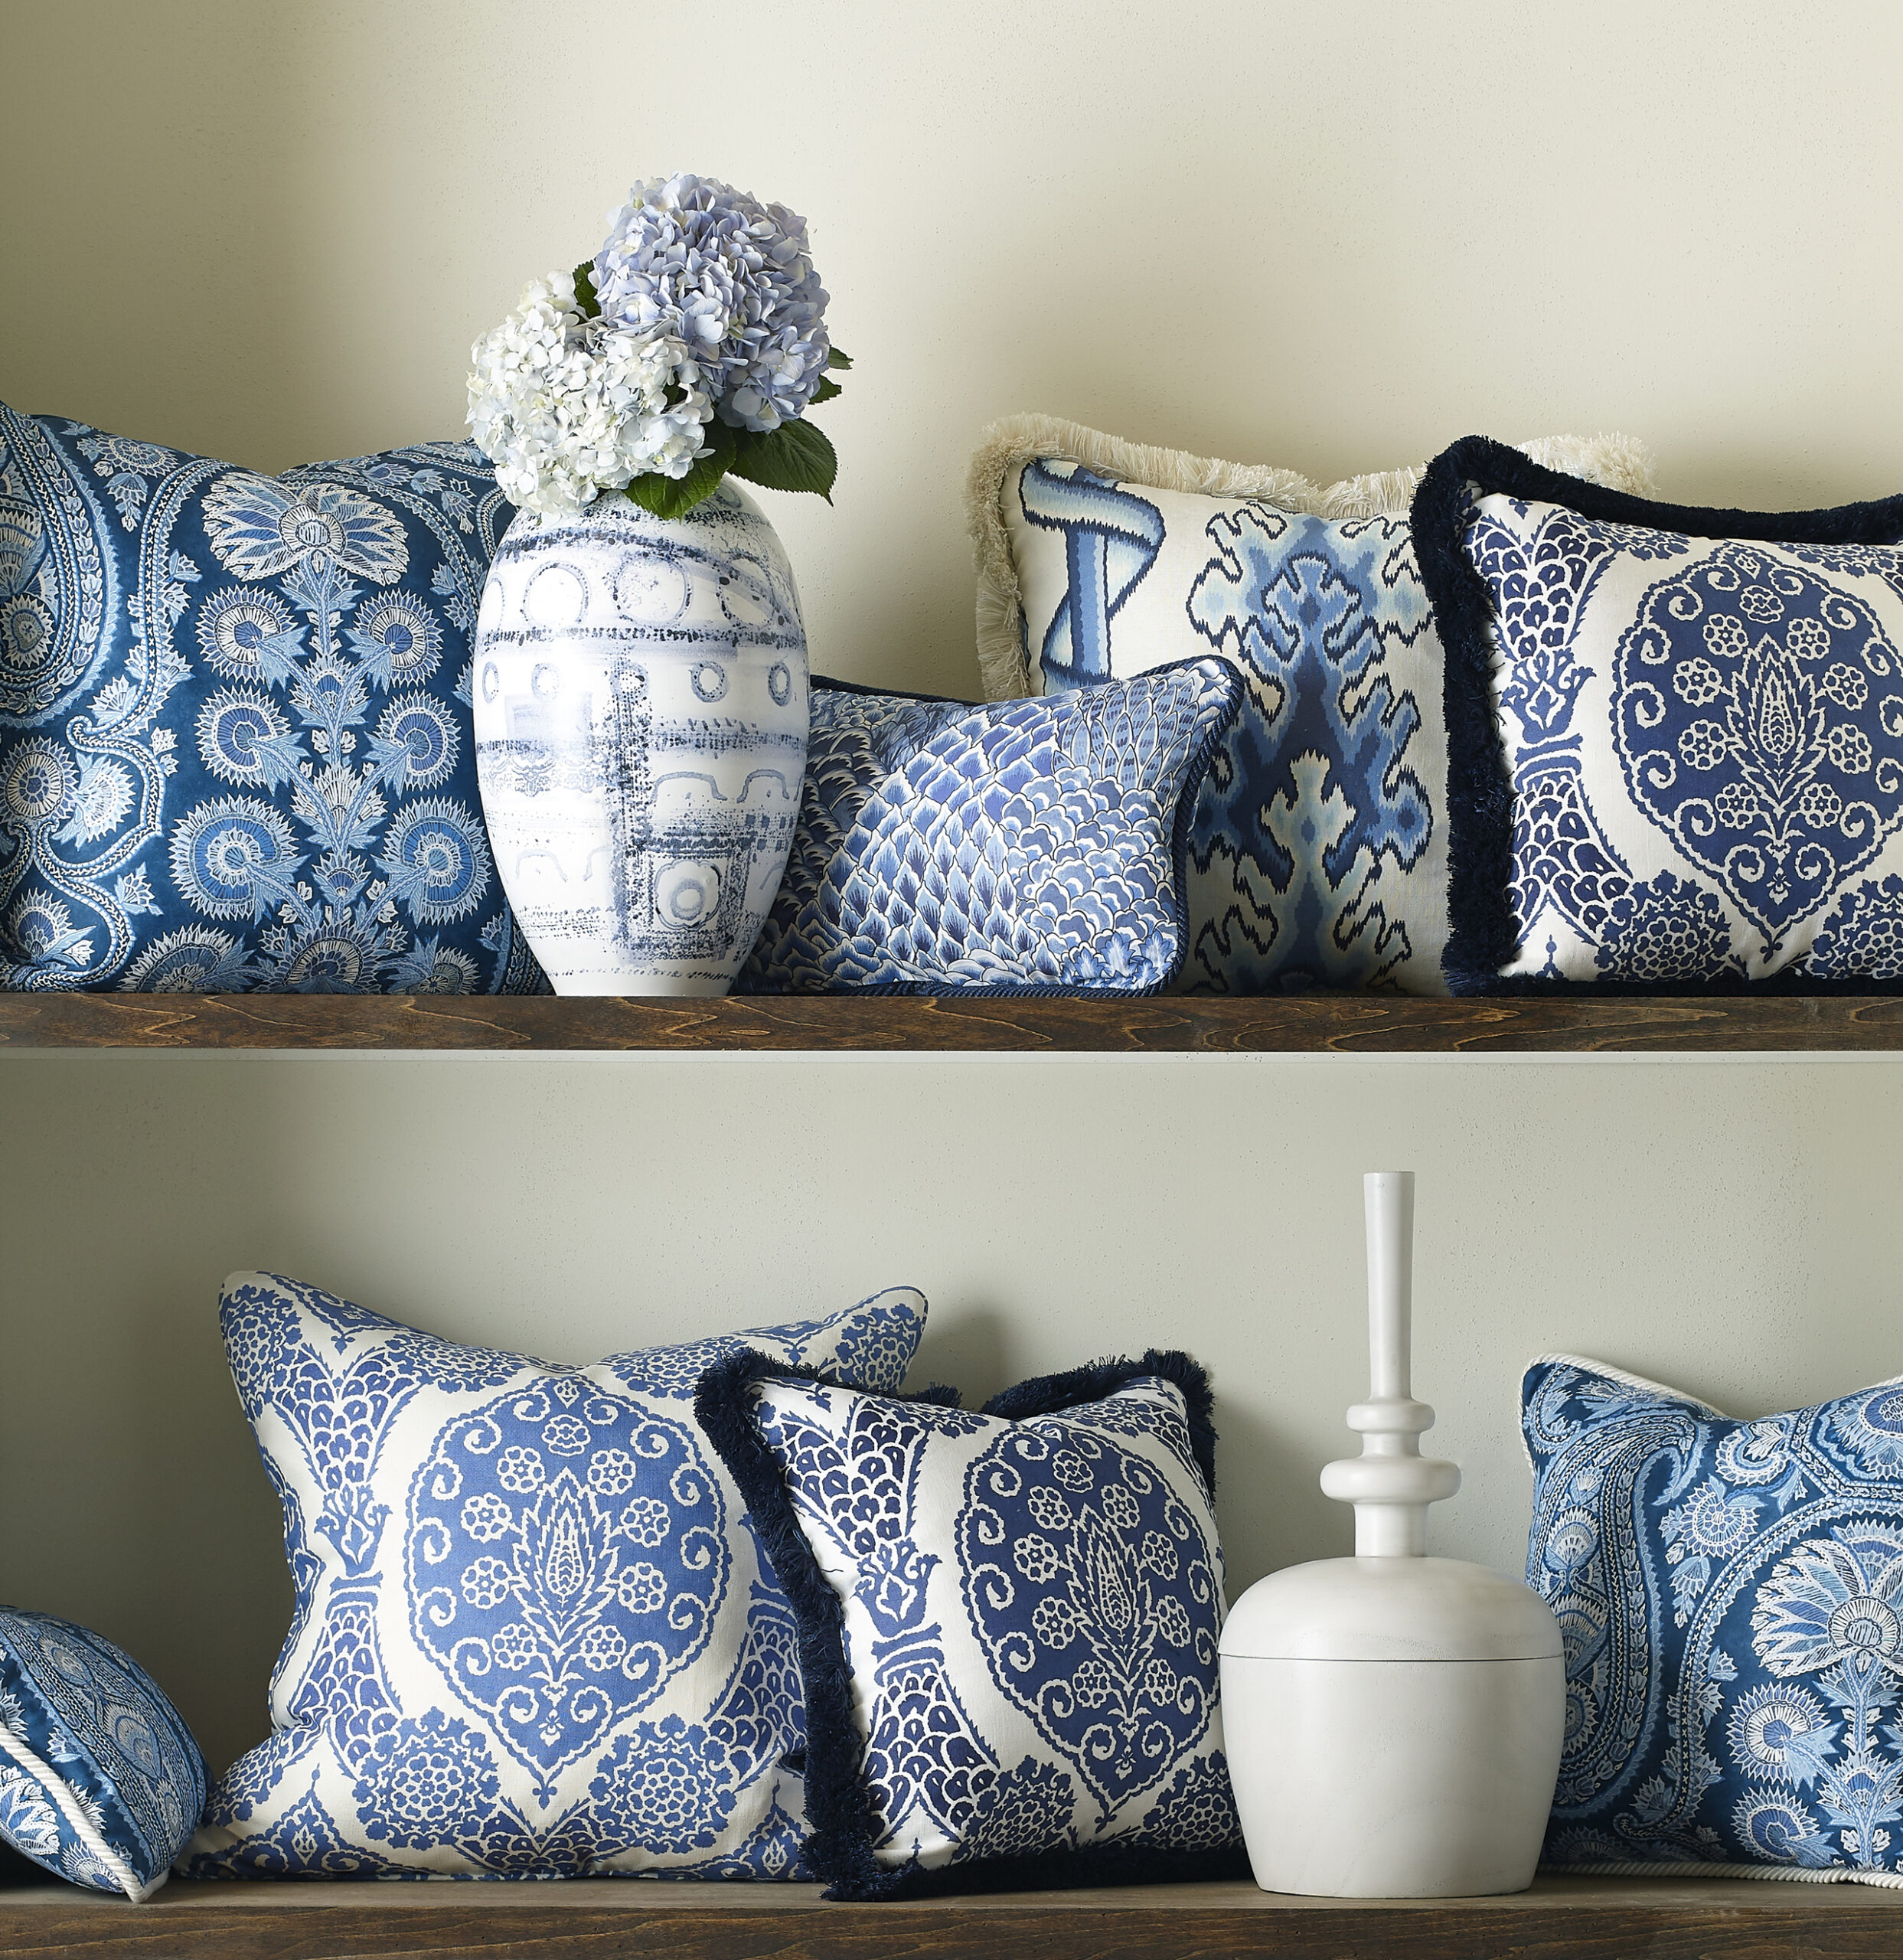 Cushions in fabrics from Brunschwig & Fils' Grand bazaar collection